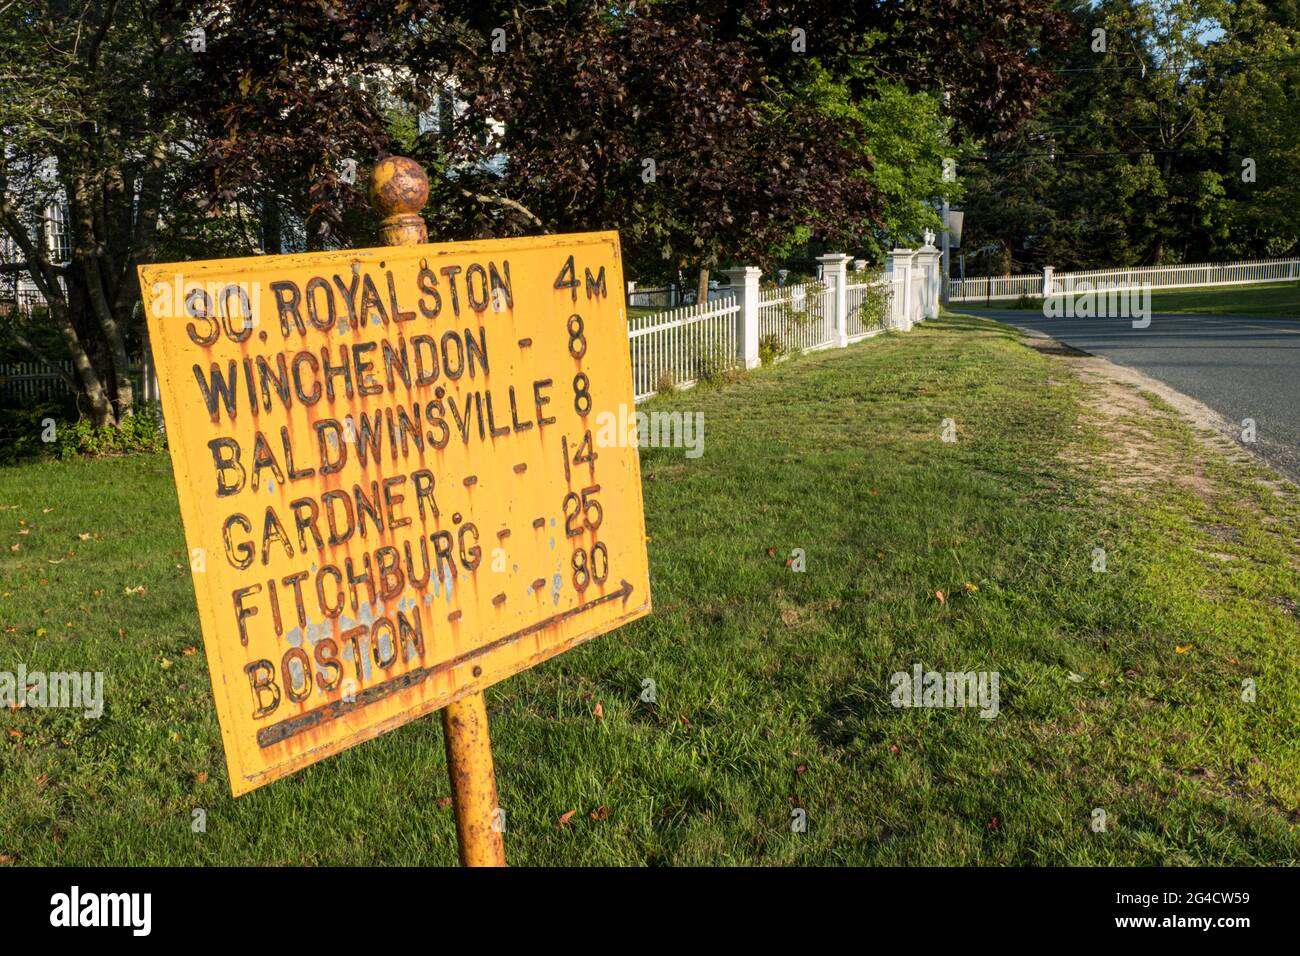 An old yellow sign in Royalston, MA showing directions Stock Photo